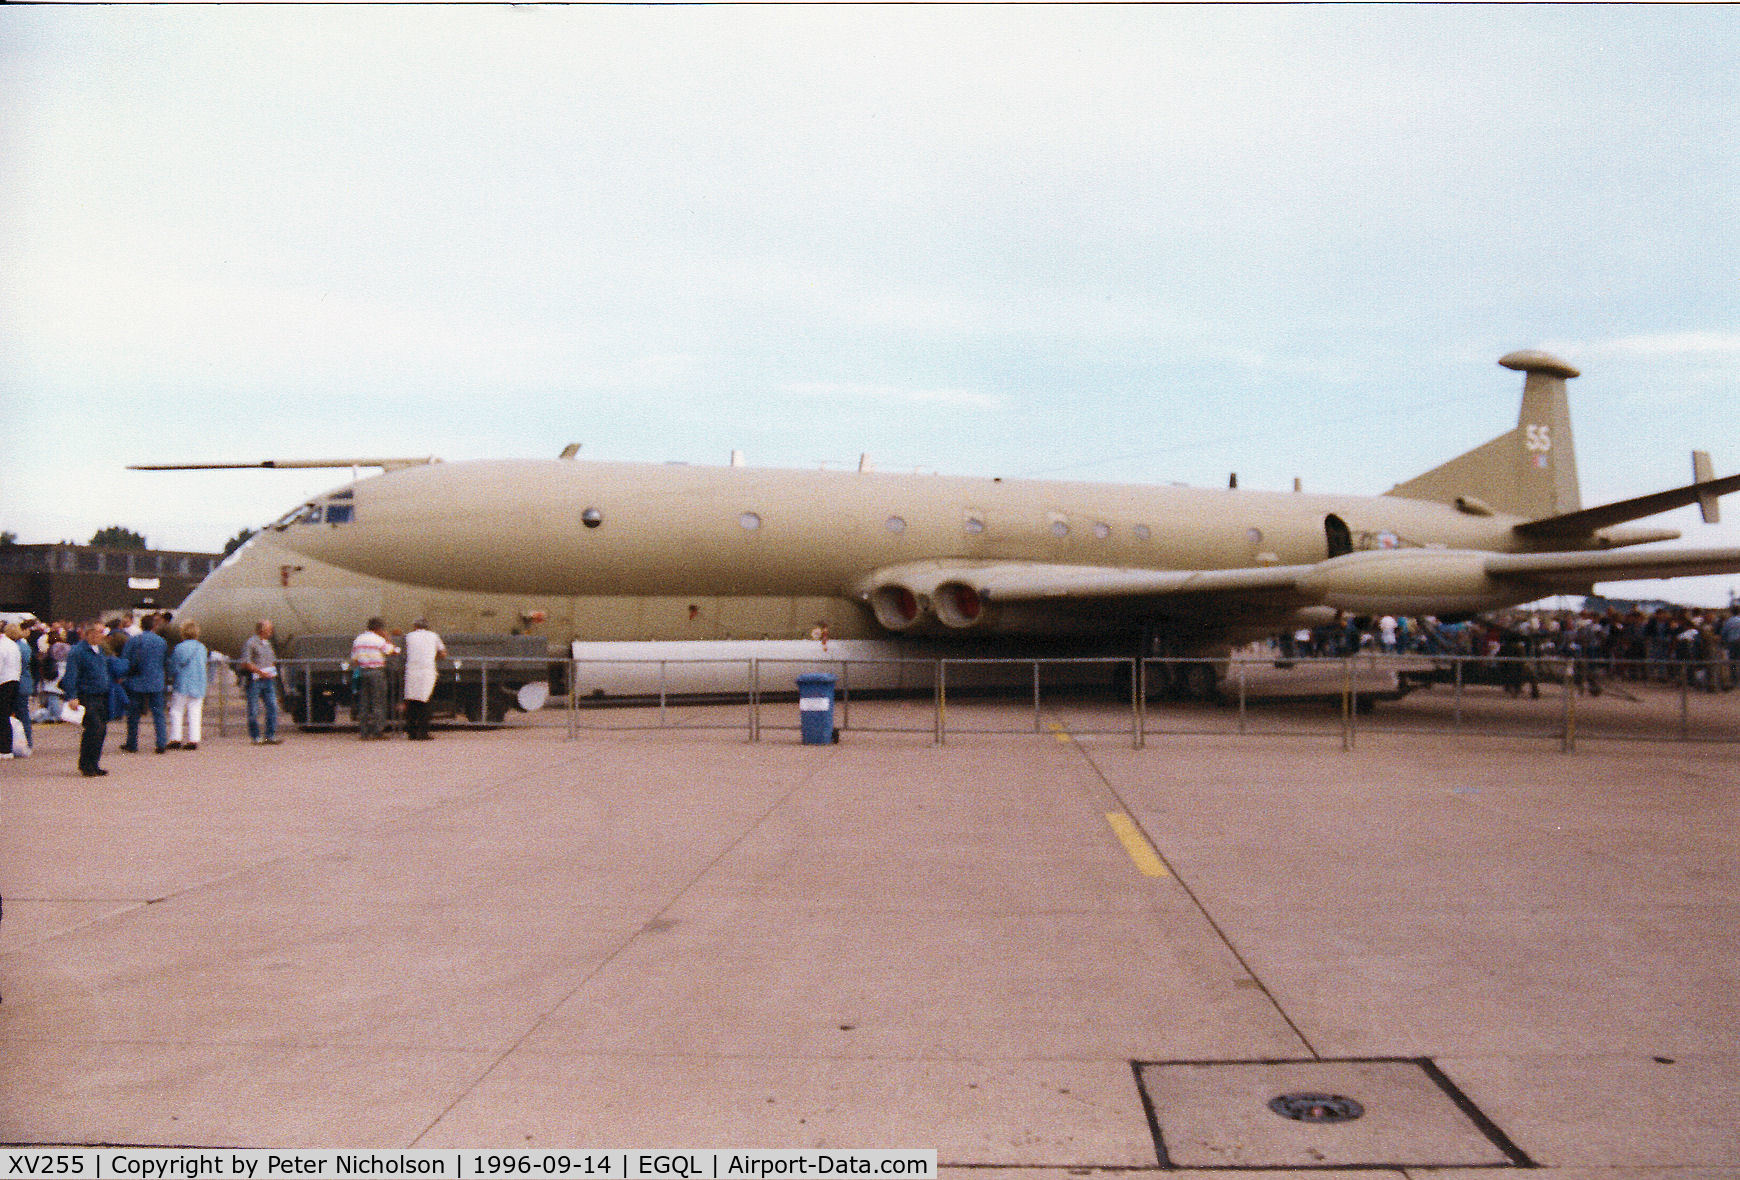 XV255, Hawker Siddeley Nimrod MR.2 C/N 8030, Nimrod MR.2, callsign One Five Victor, of the Kinloss Maritime Wing on display at the 1996 RAF Leuchars Airshow.